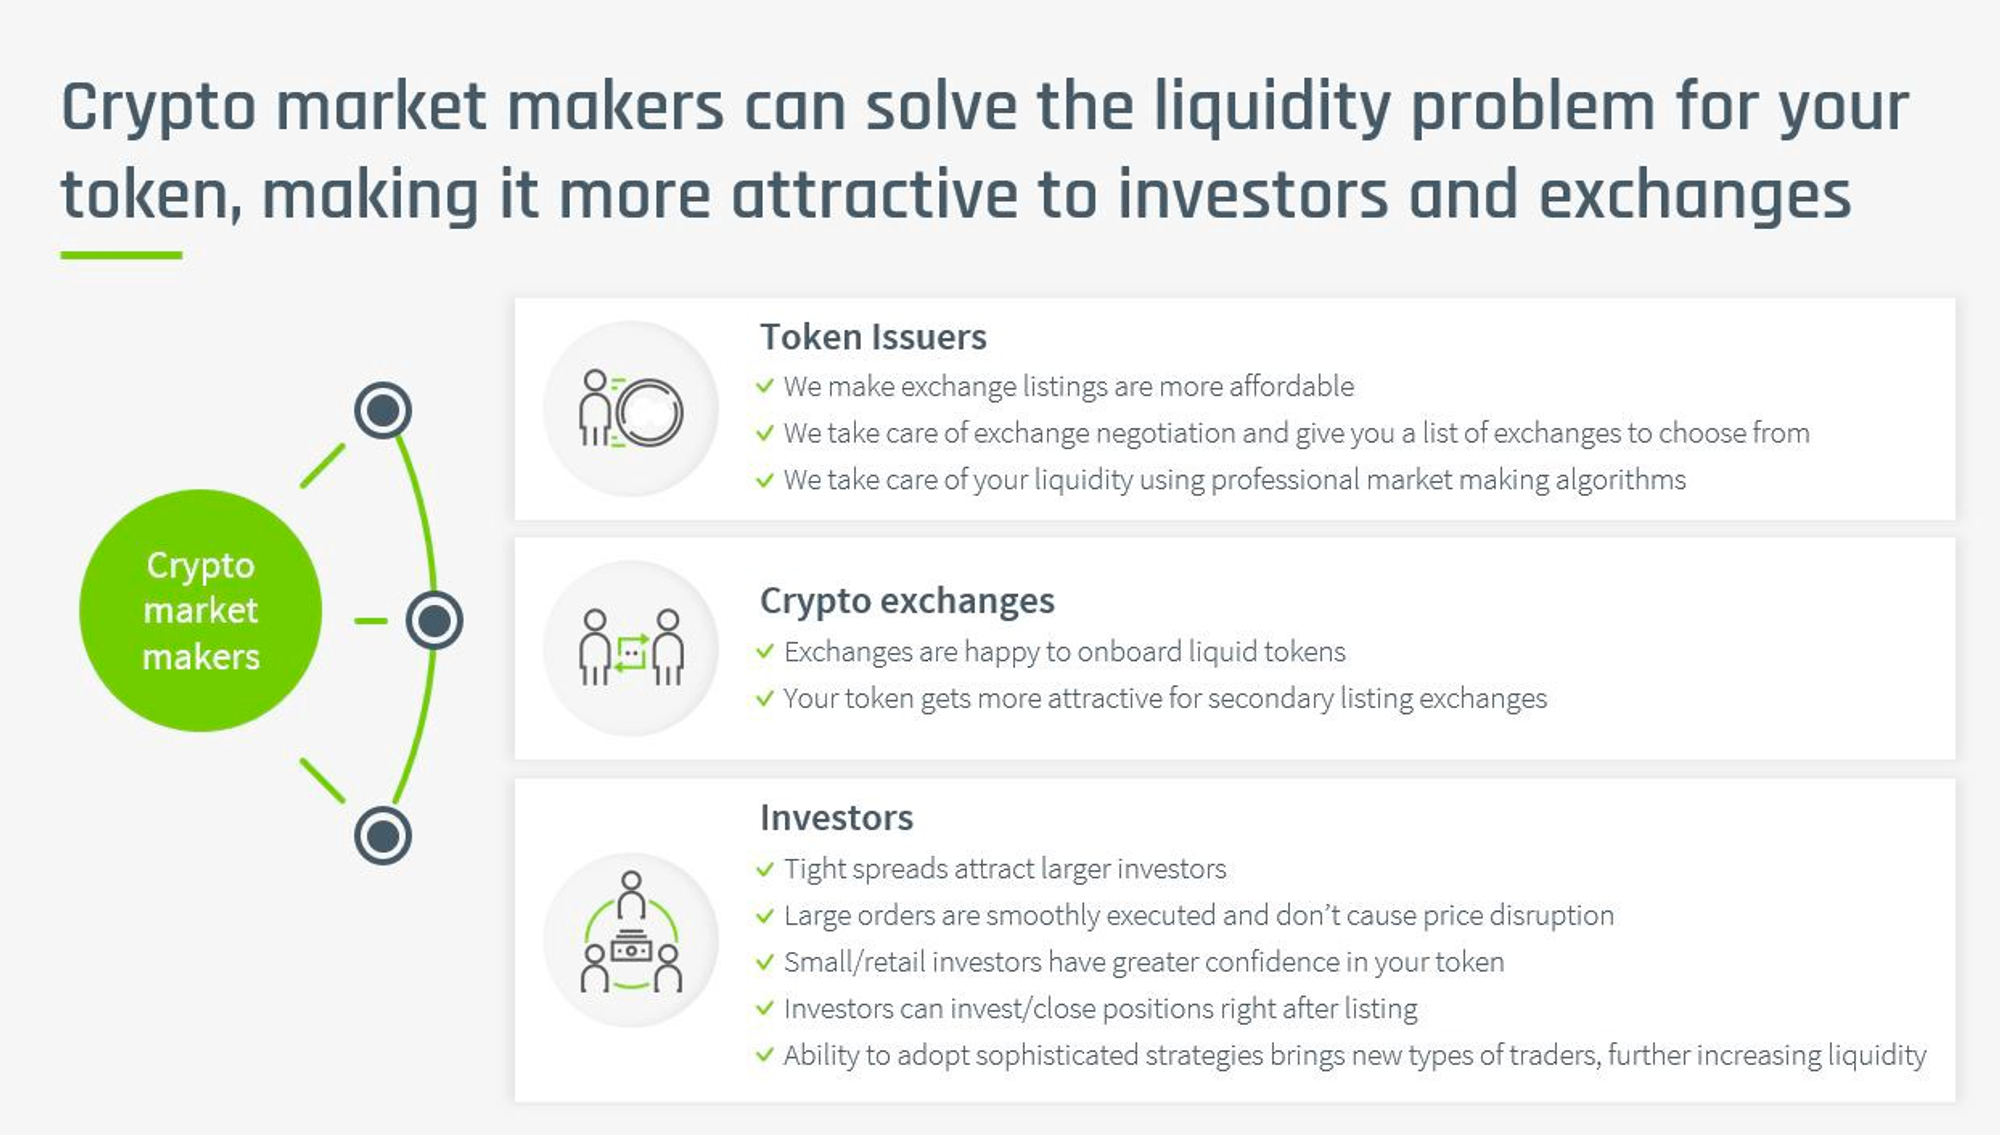 How Professional Cryptocurrency Market Makers Can Solve Market Liquidity Problems for ProjectsSource：Wintermute